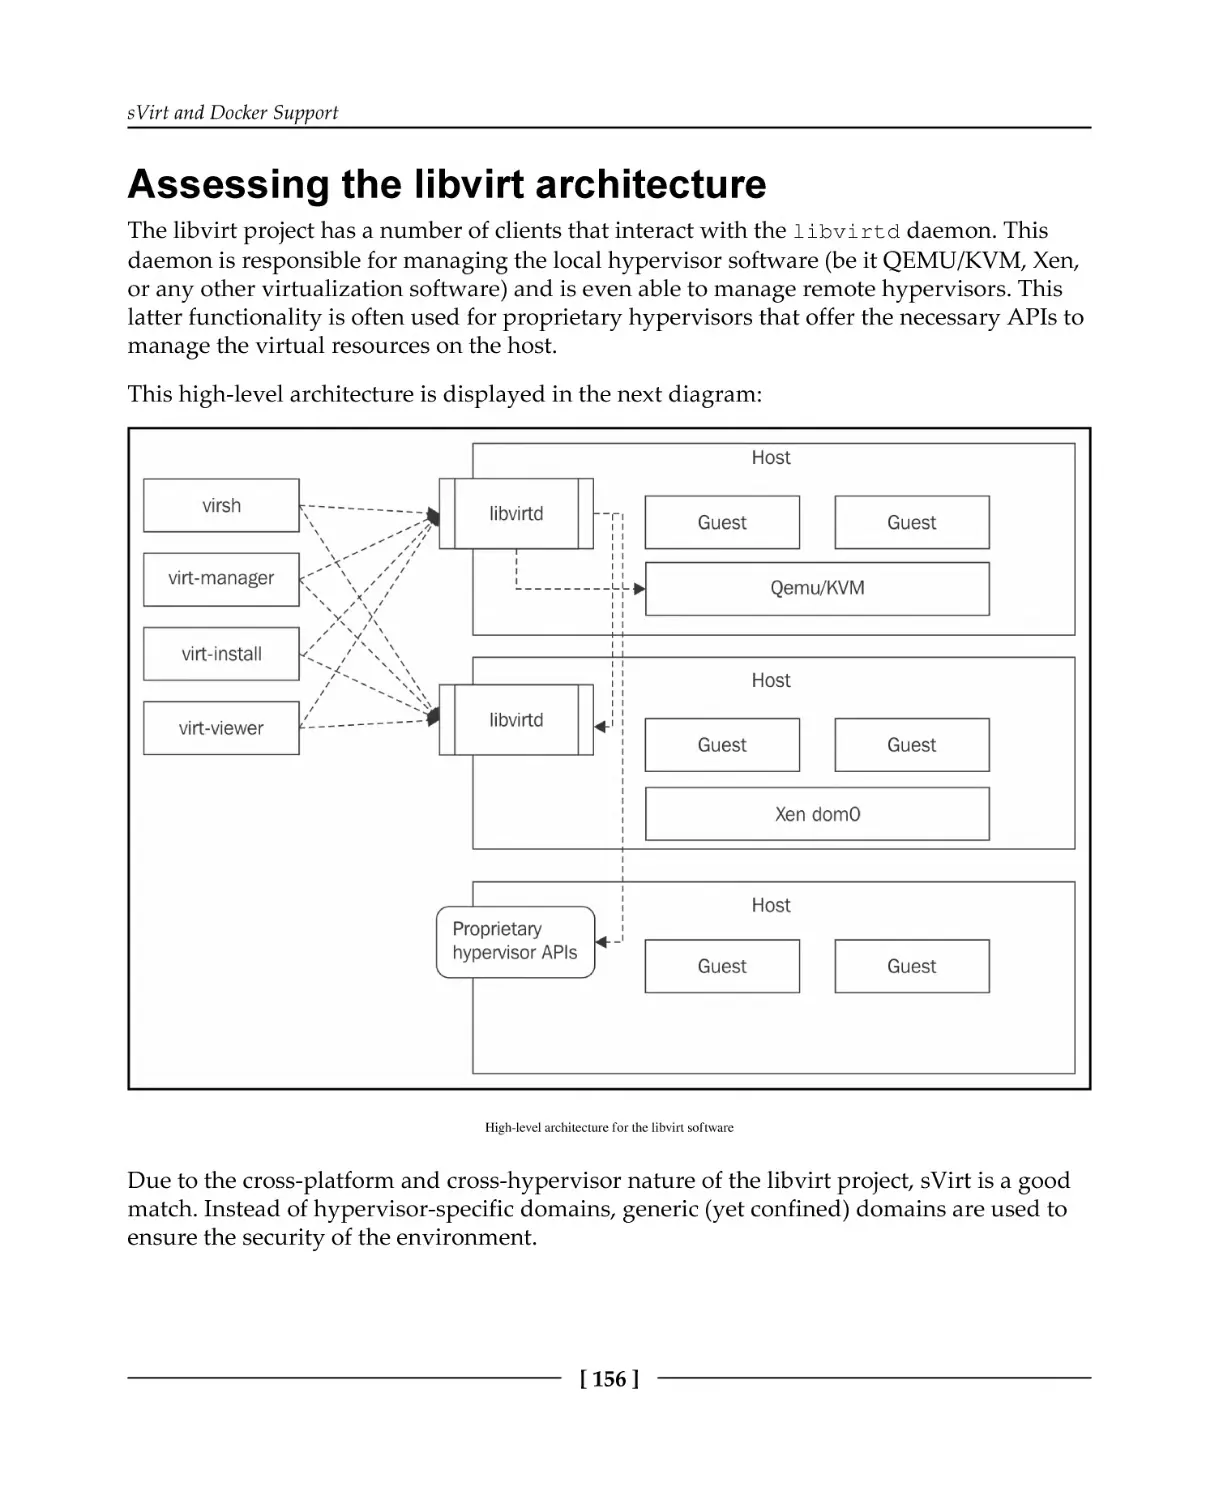 Assessing the libvirt architecture